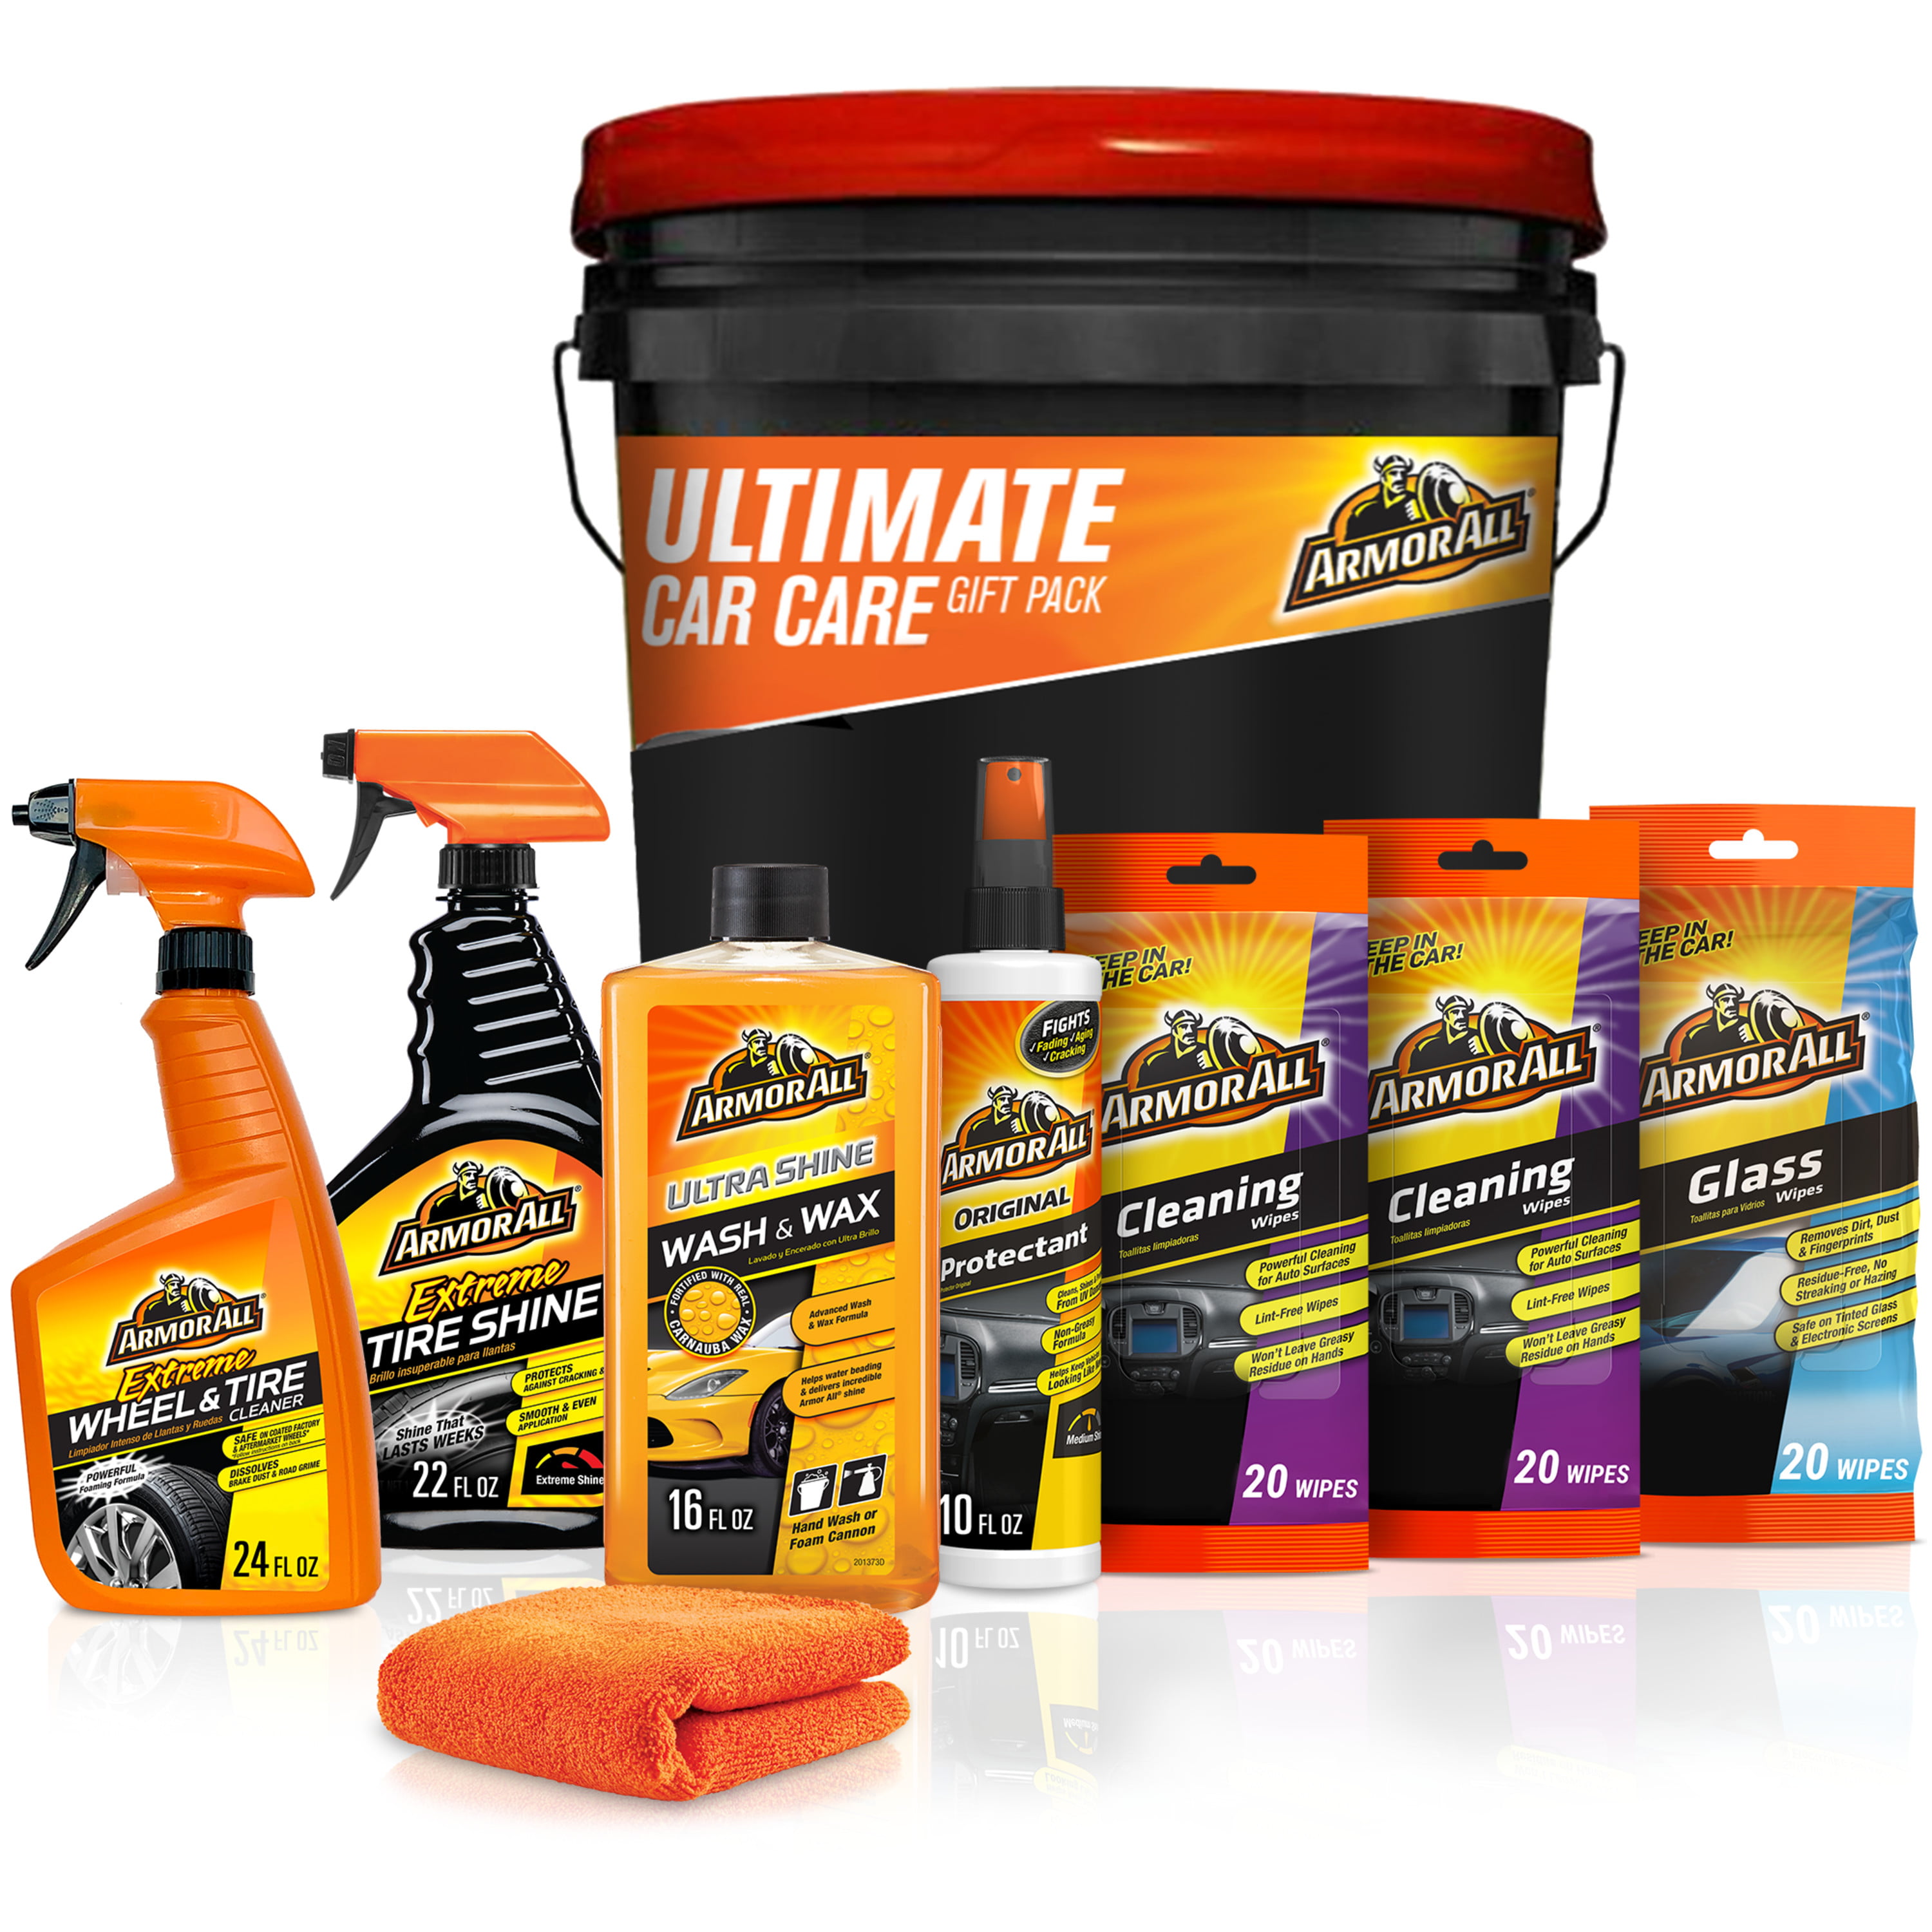 10-Pc Armor All Ultimate Auto Cleaners Car Care Set $22.90 + Free